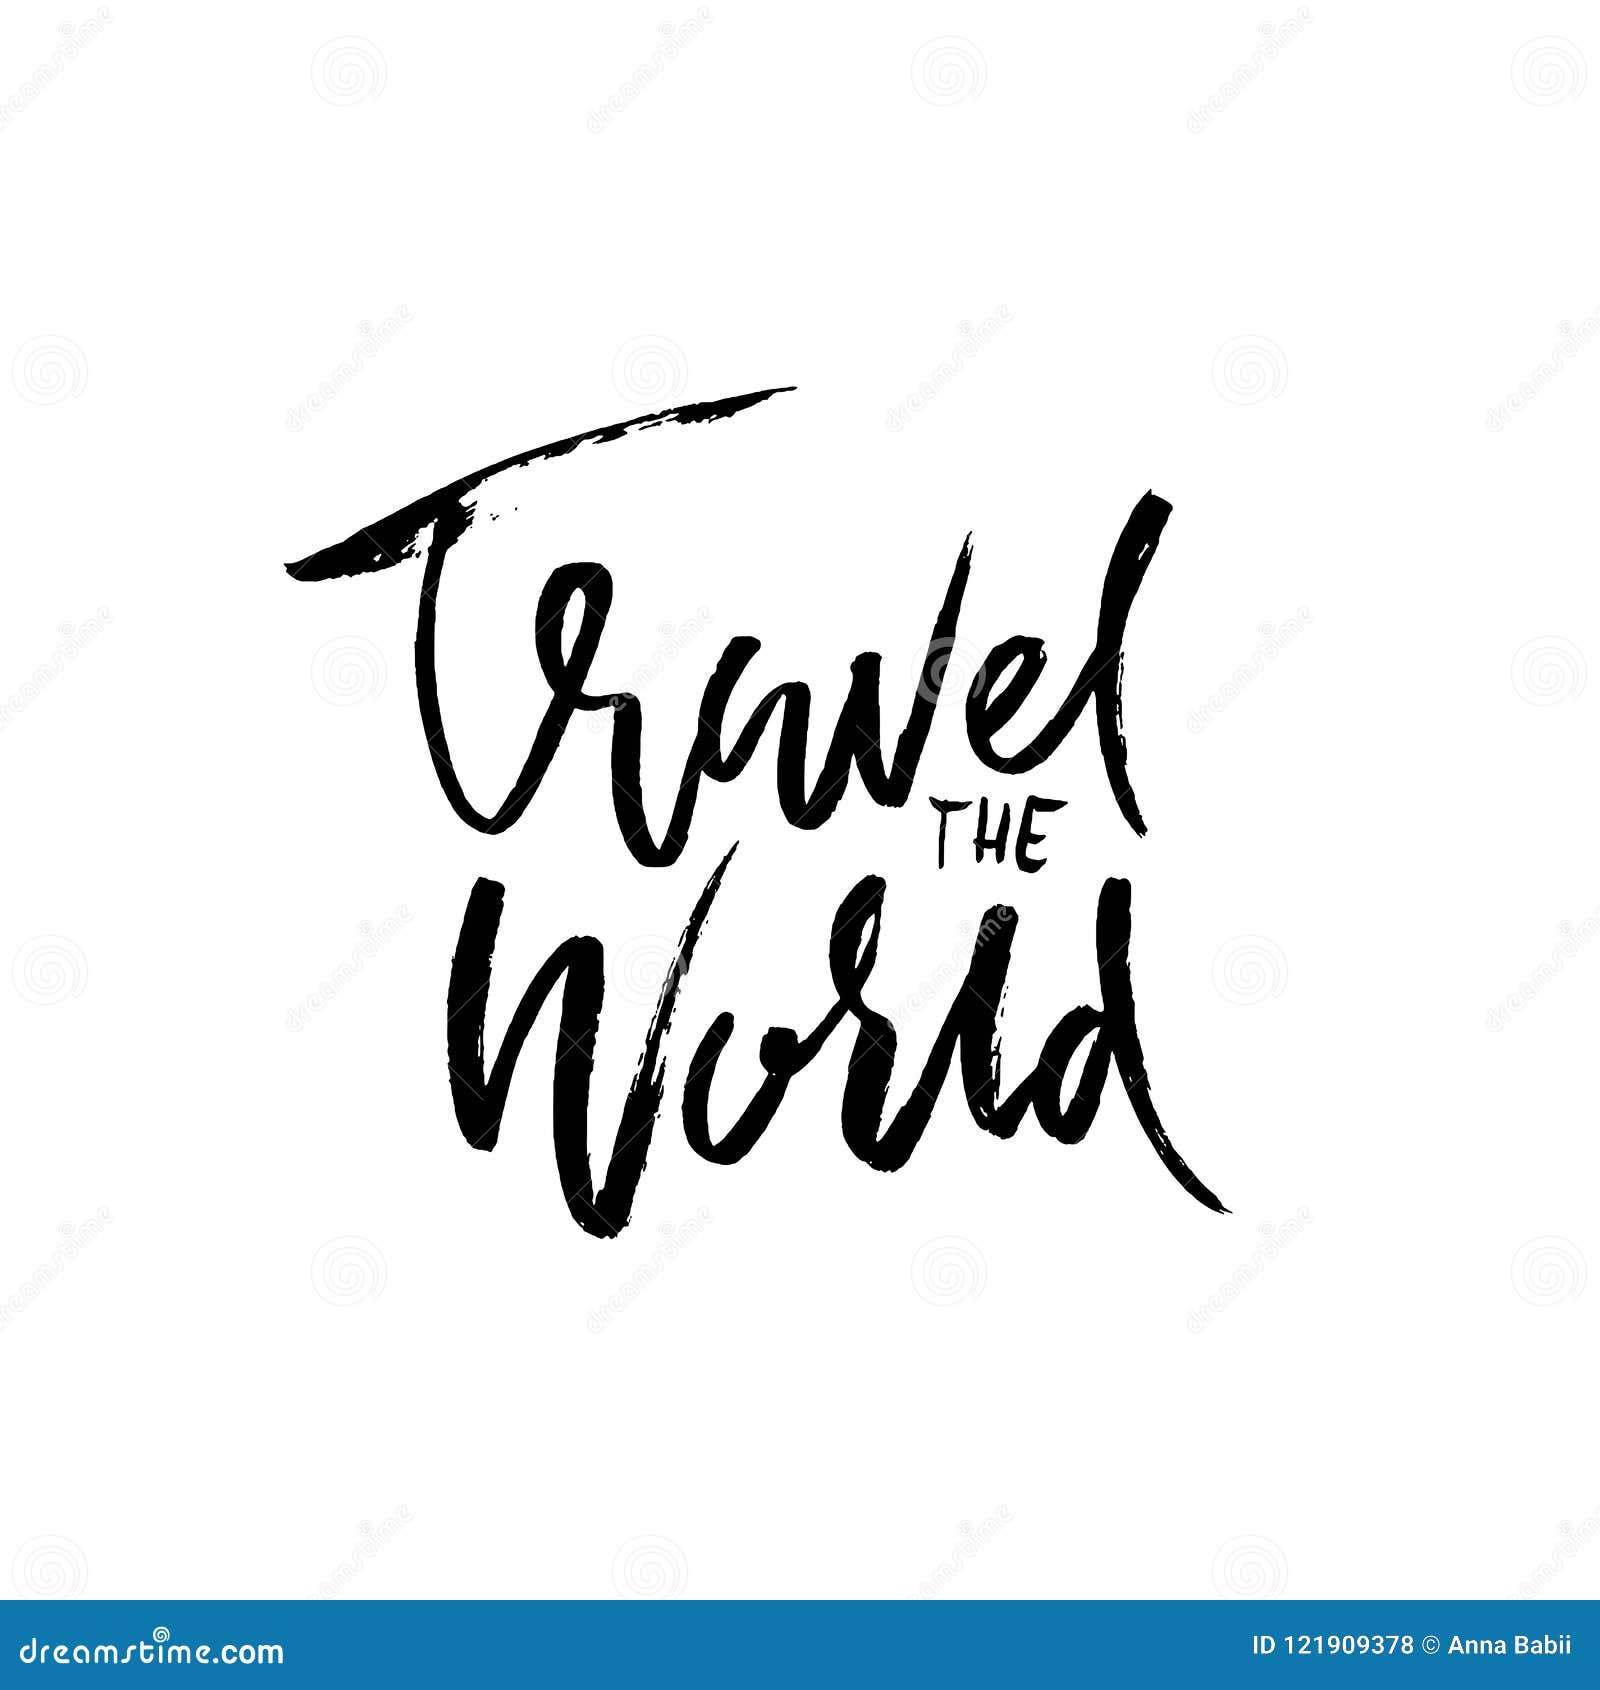 travel word drawing